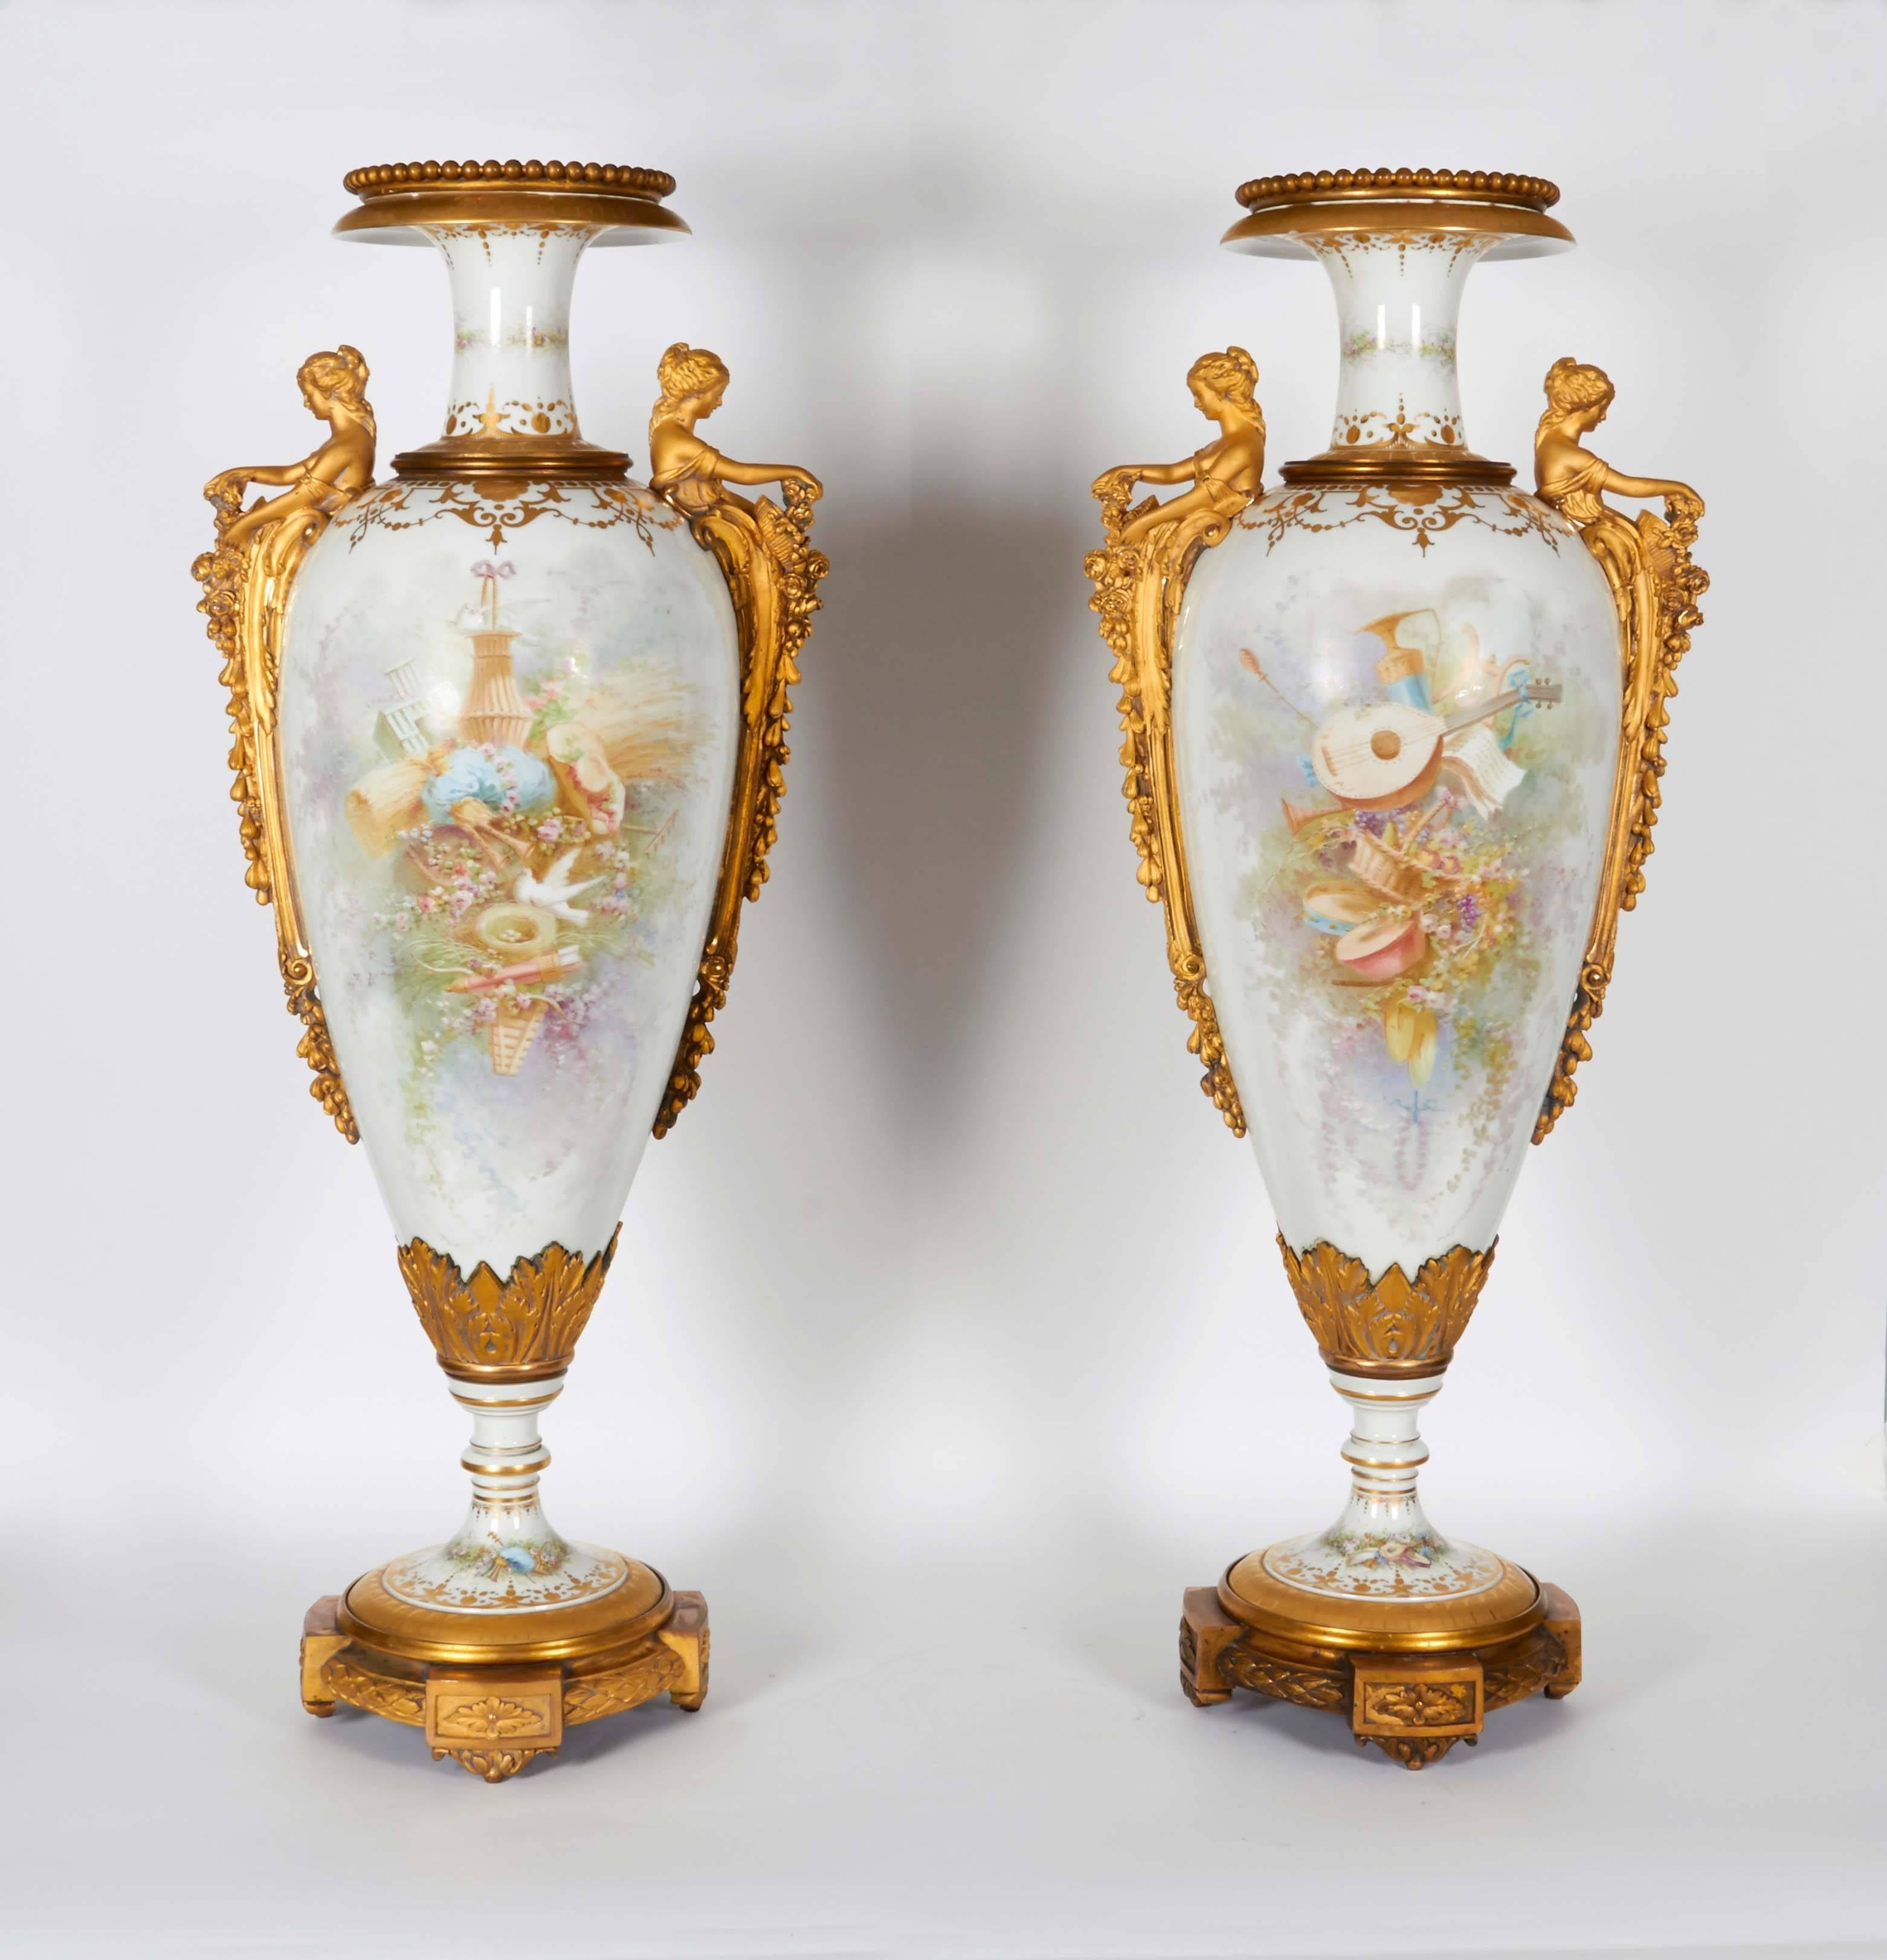 Monumental Pair of French Ormolu-Mounted Sevres Porcelain Vases Collot 4